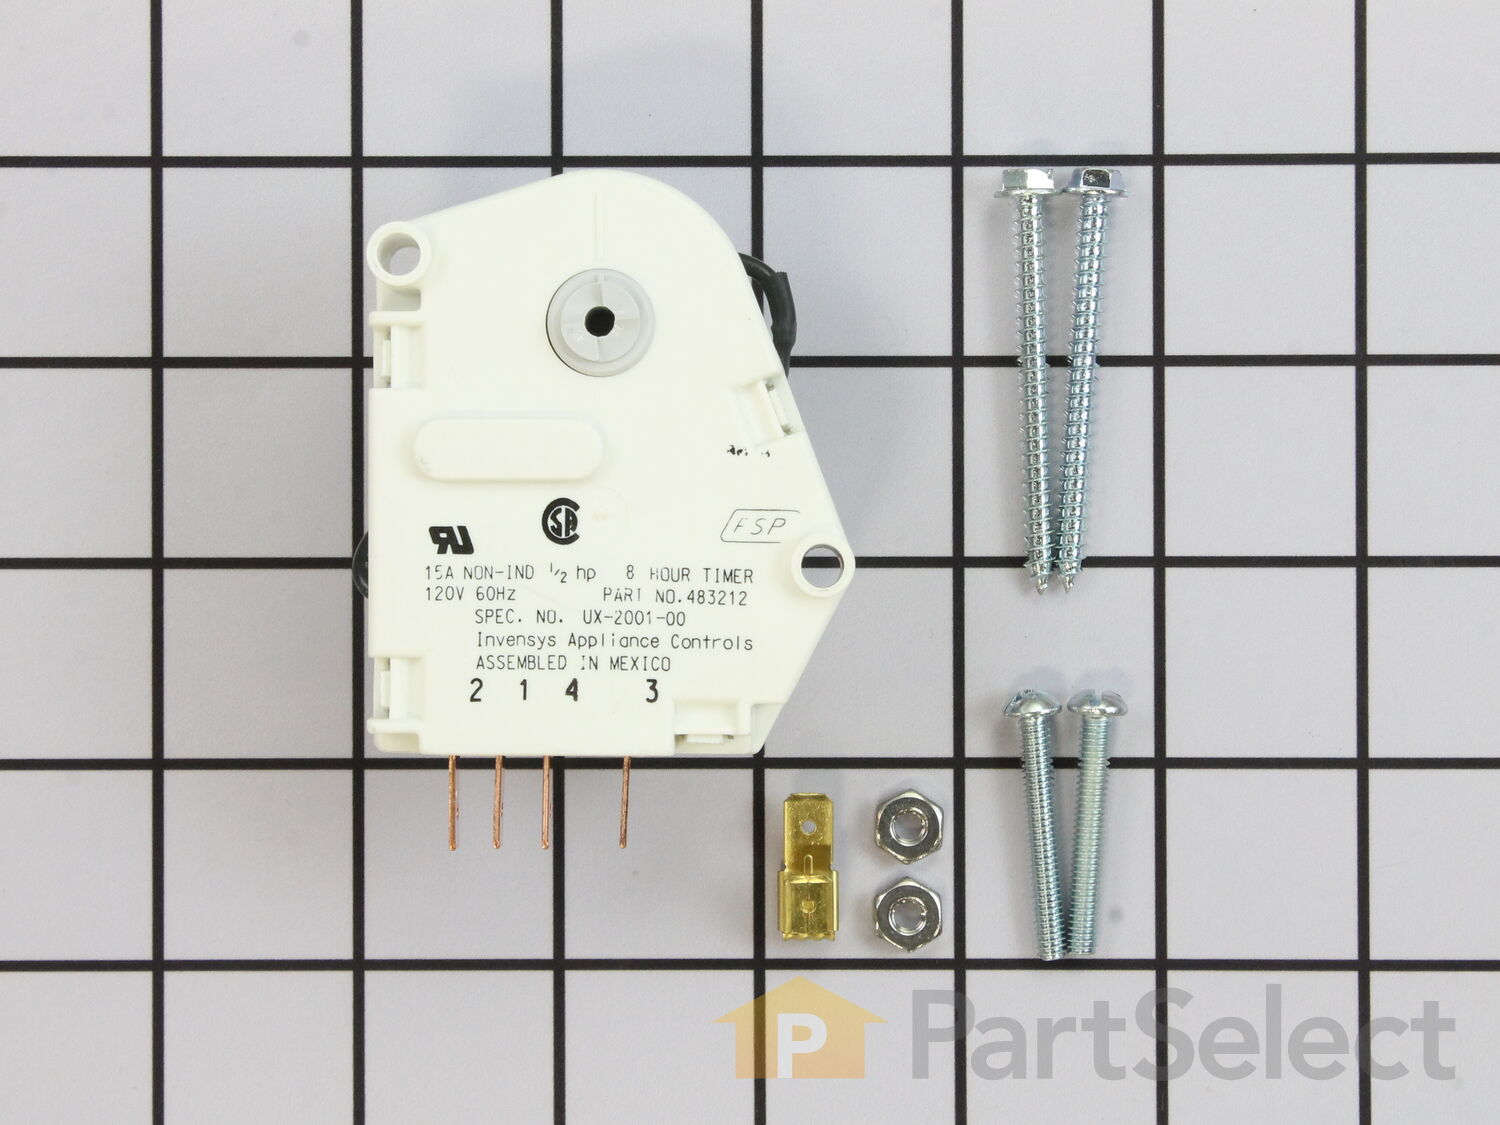 PS327819 2183400 Defrost Timer for Whirlpool Sears AP2984369